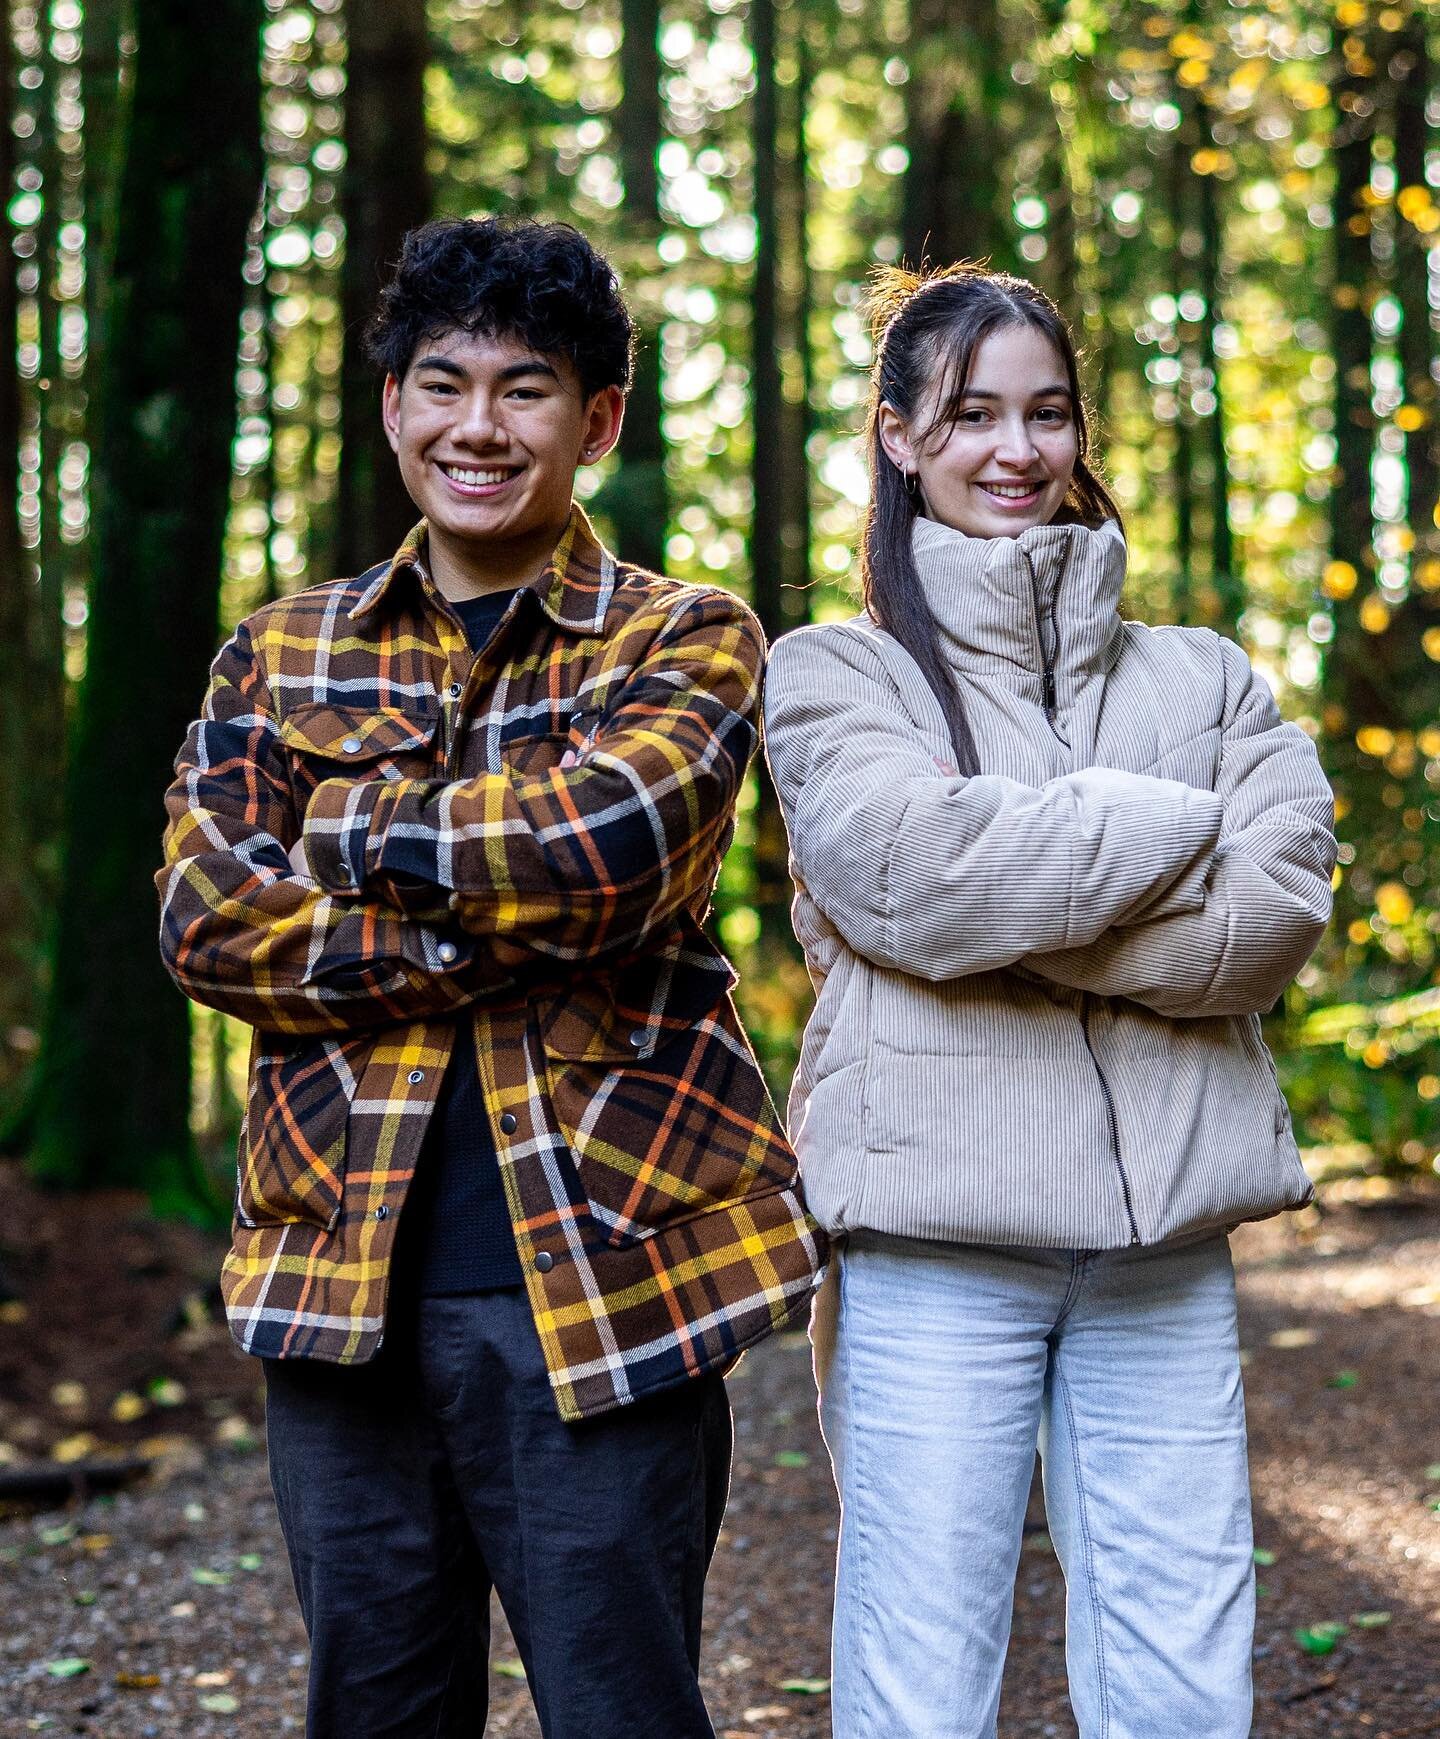 It&rsquo;s time for an introduction! Meet the Dream Team - Kaylen Lomas and Julian Sun!

Kaylen Lomas is a Vancouver based sports graphic designer. She got her start working for the Coquitlam SR. Adanacs running their social medias. Since then she&rs